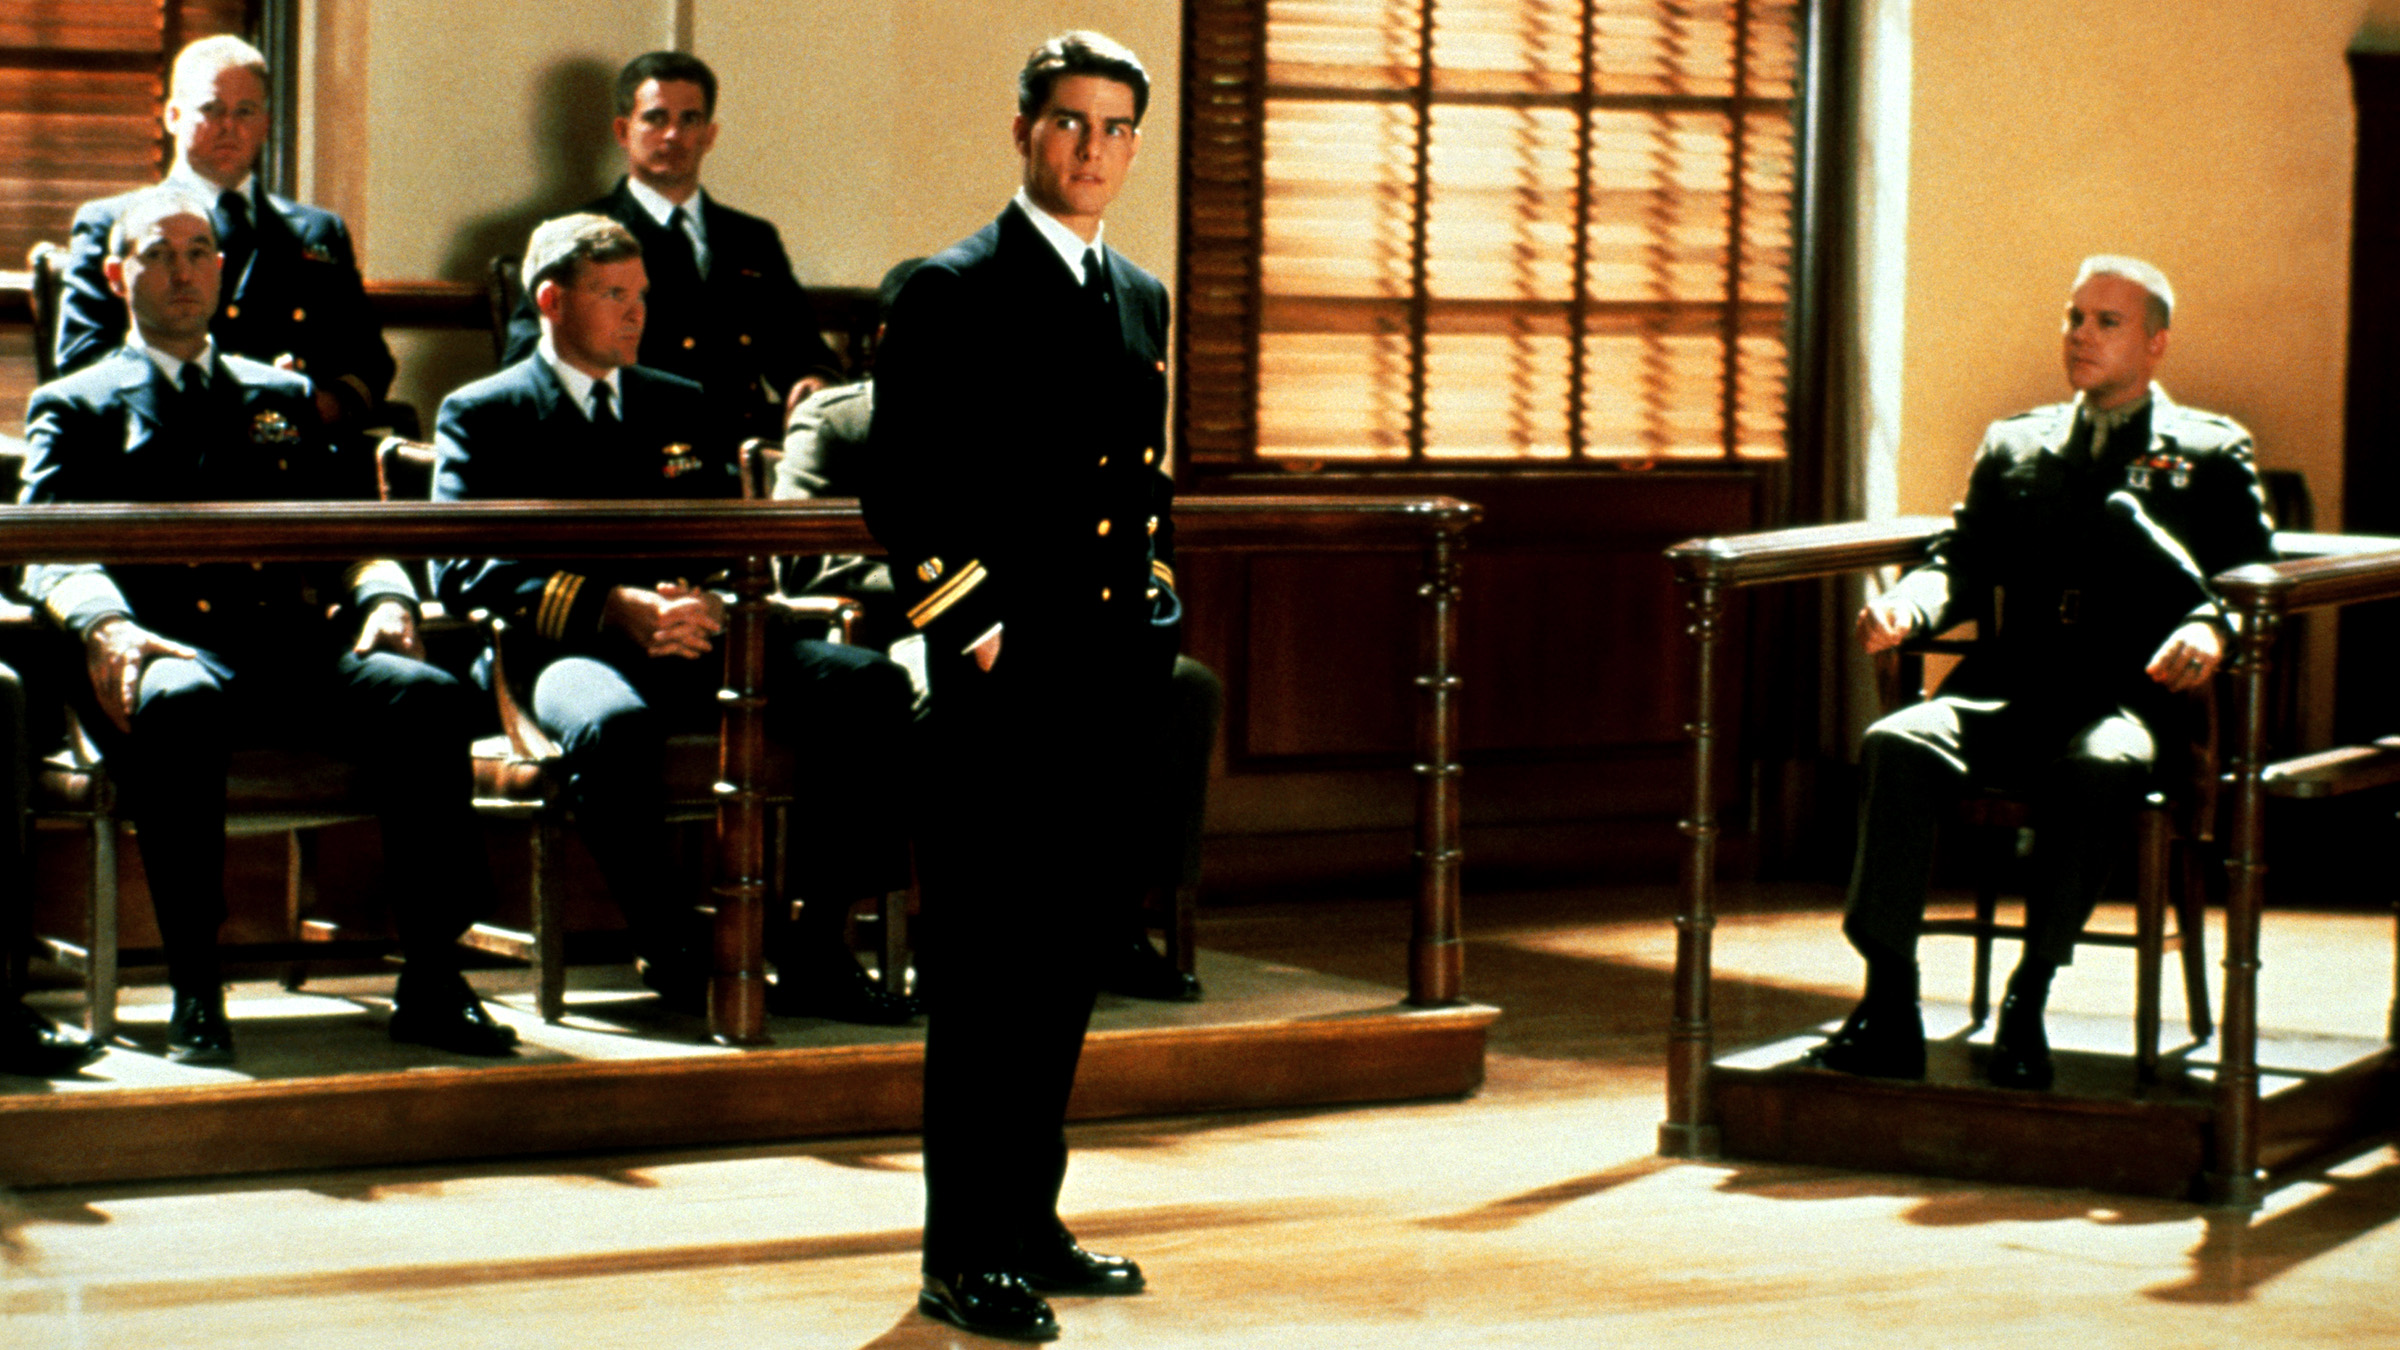 Still of Tom Cruise and Kiefer Sutherland in A Few Good Men (1992)